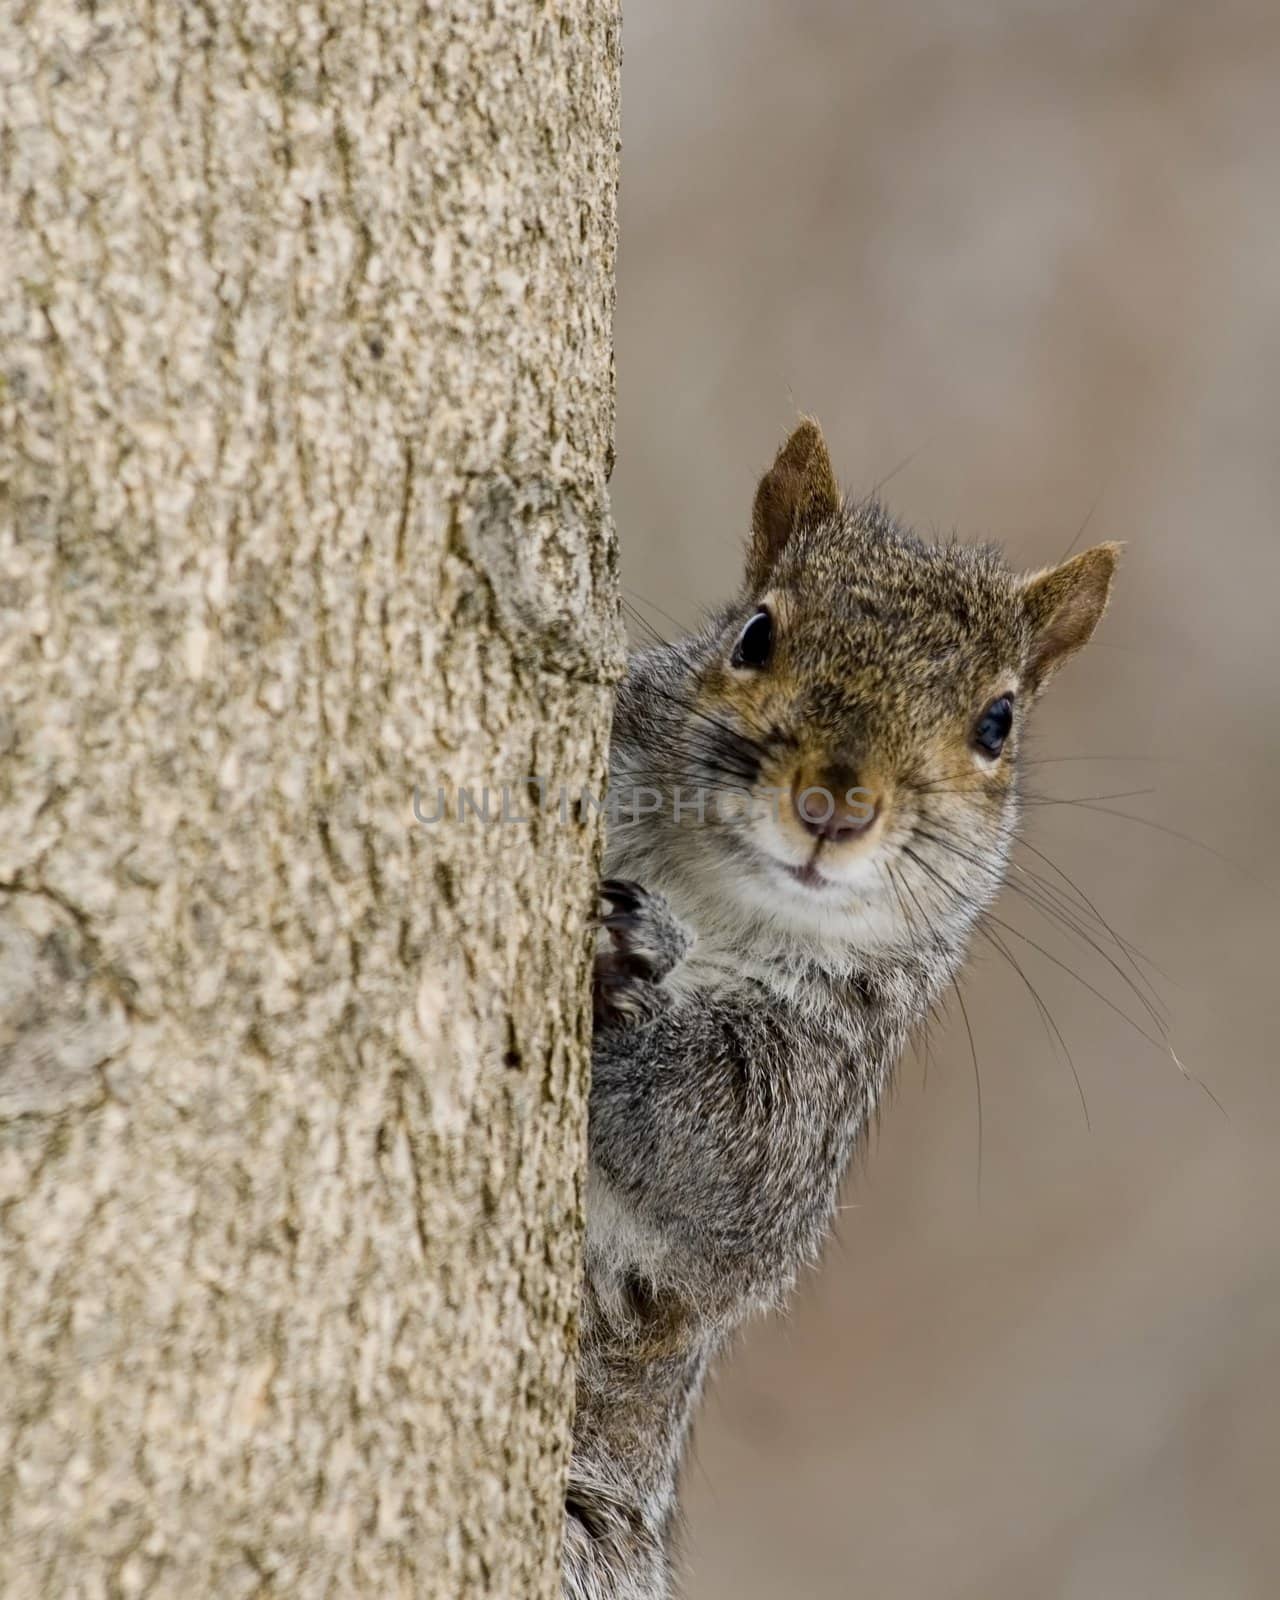 A gray squirrel perched on a tree trunk.